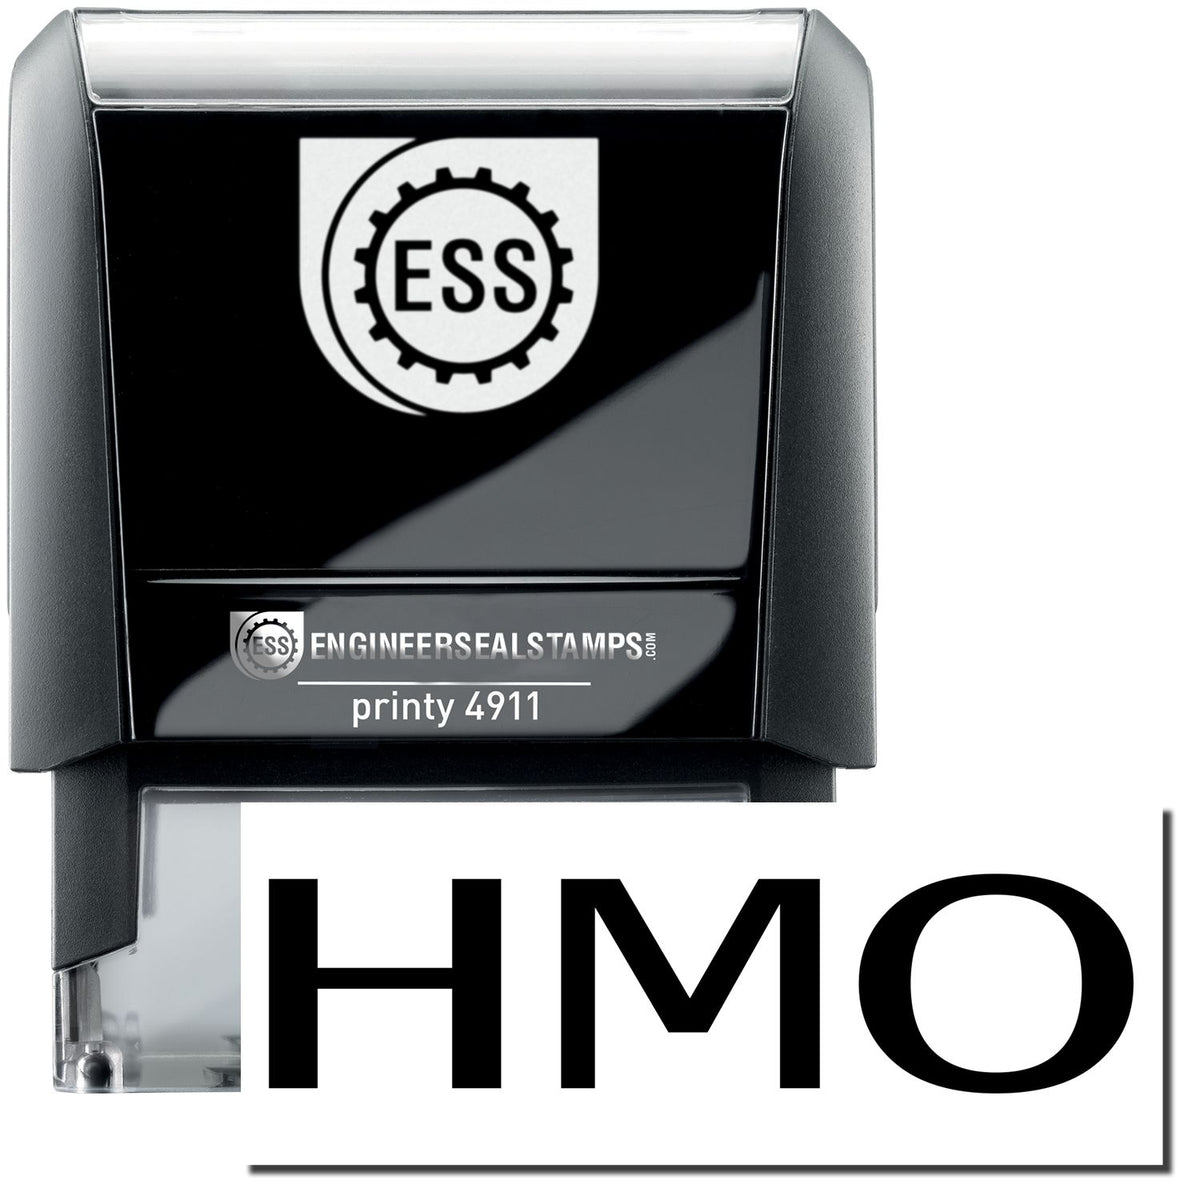 A self-inking stamp with a stamped image showing how the text &quot;HMO&quot; is displayed after stamping.